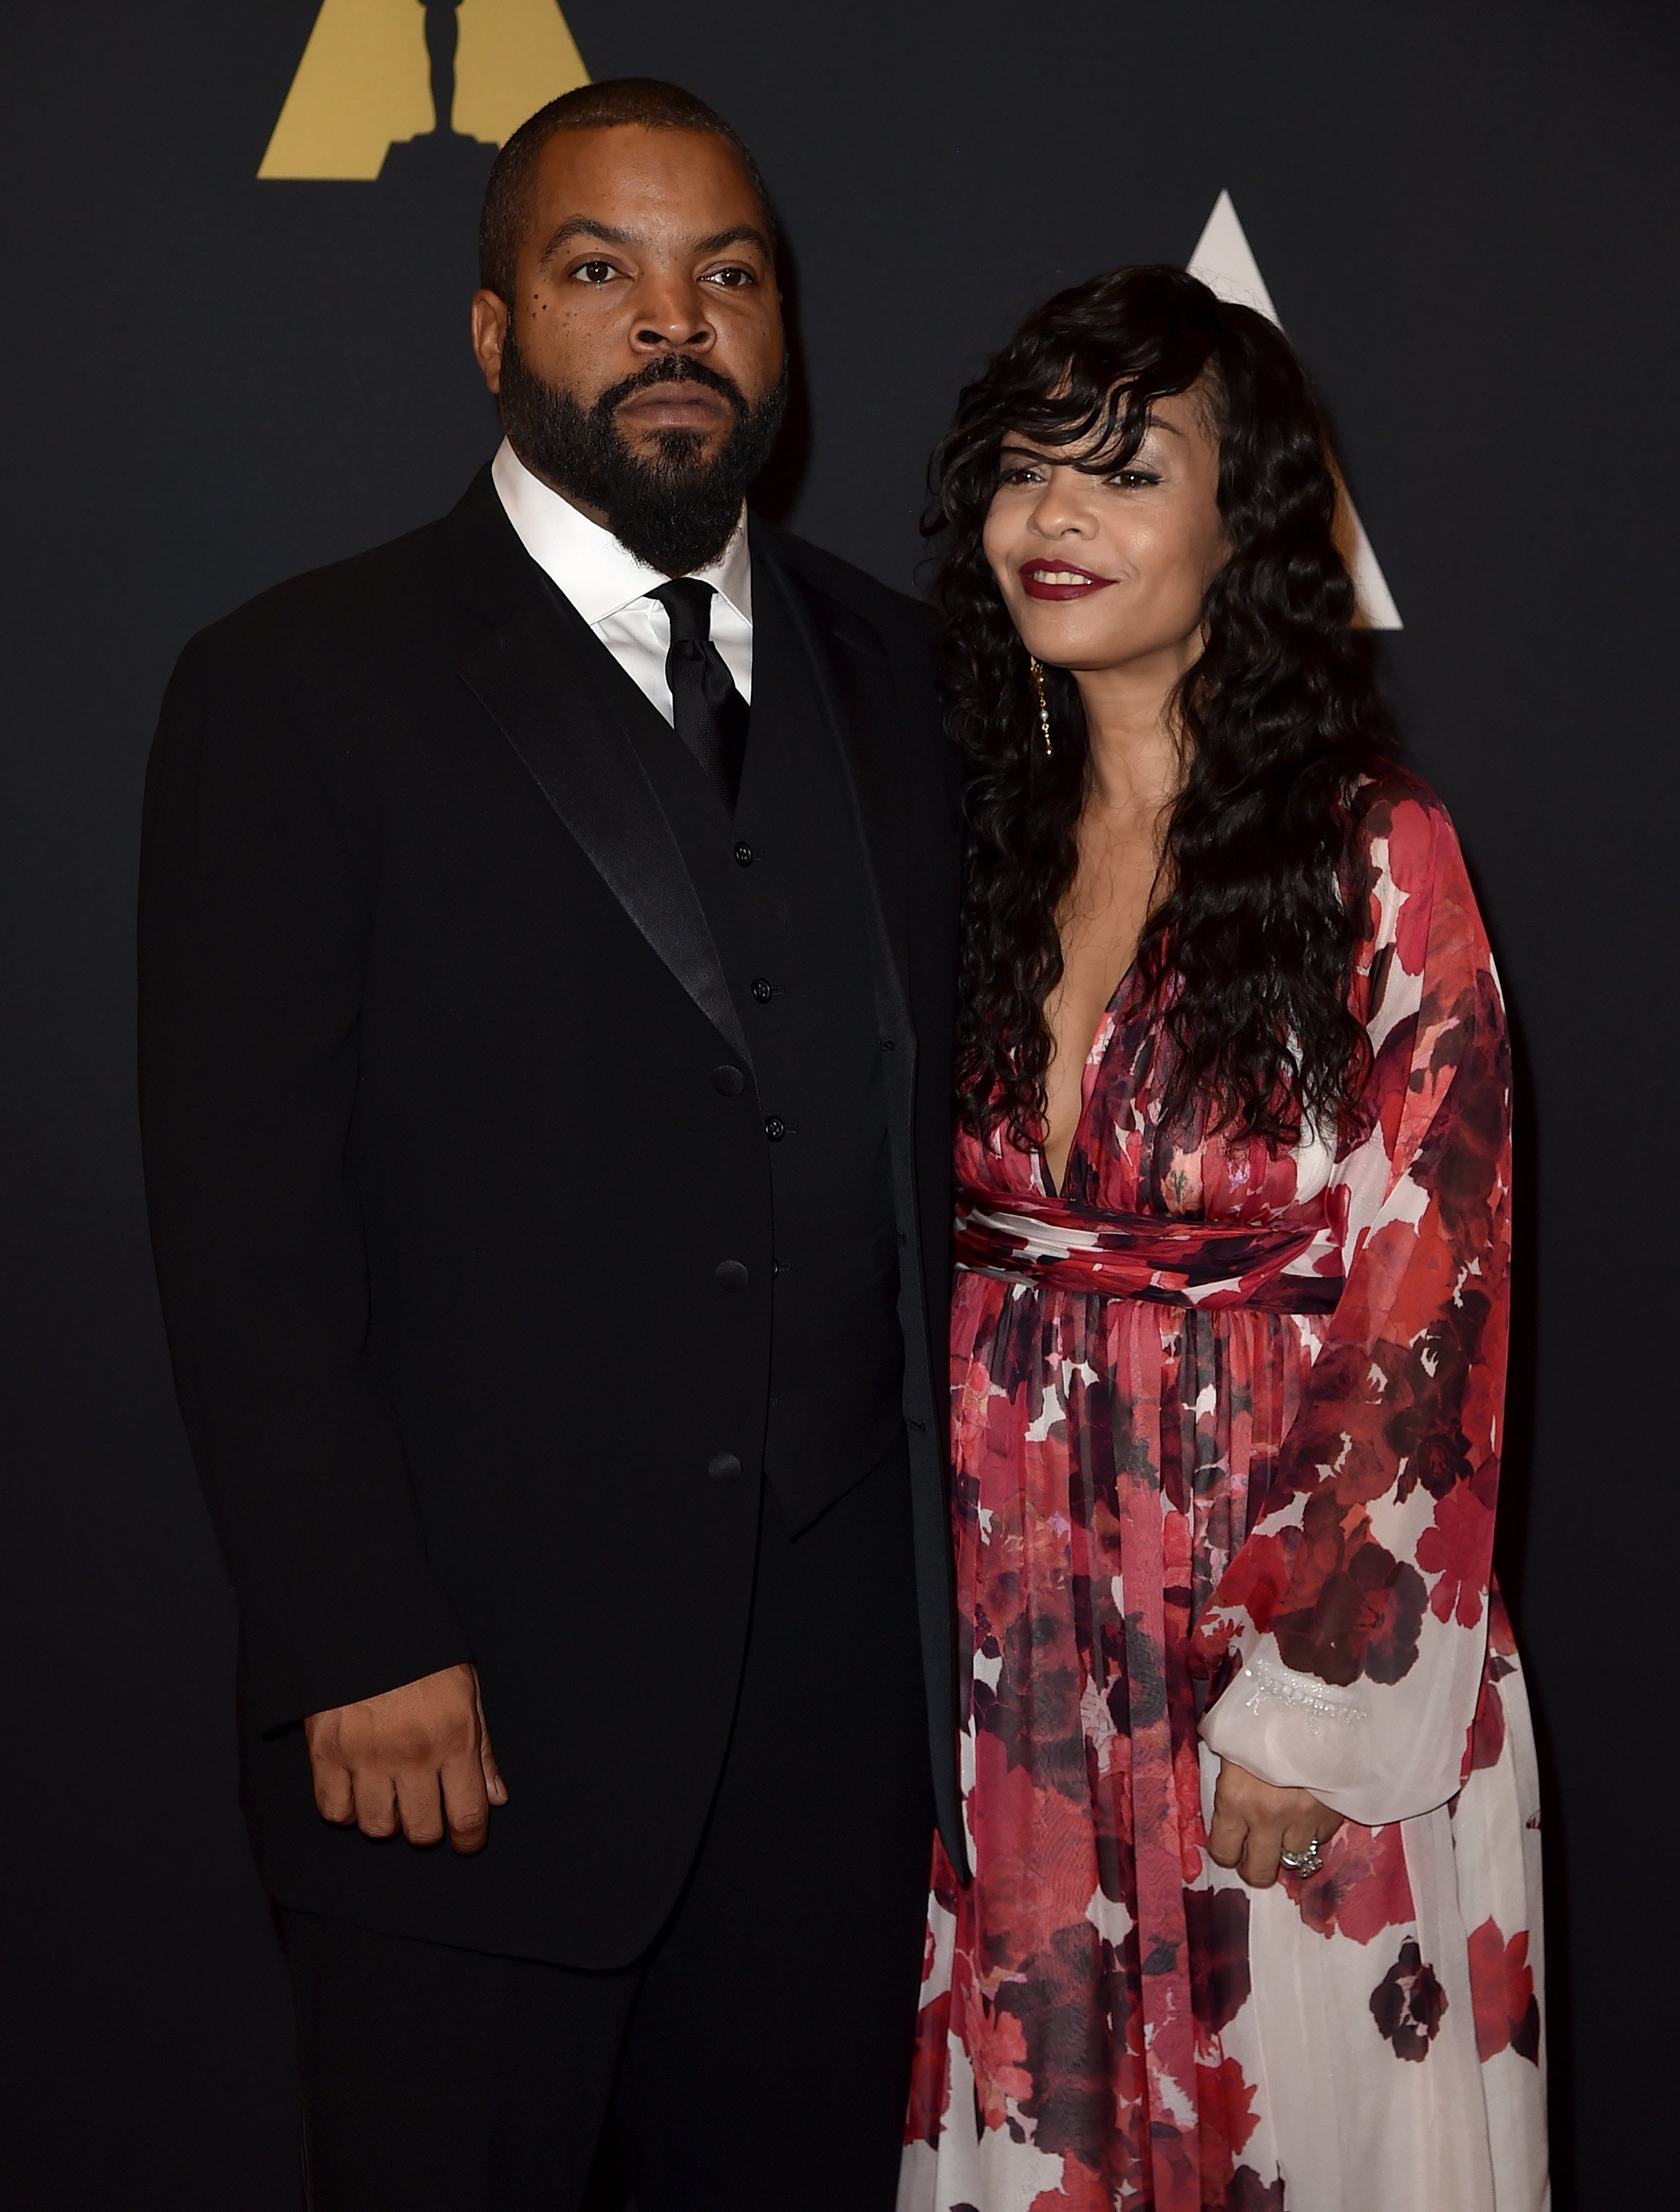 Ice Cube et Kimberly Woodruff à Hollywood & Highland Center le 14 novembre 2015 à Hollywood, Californie |  Source : Getty Images